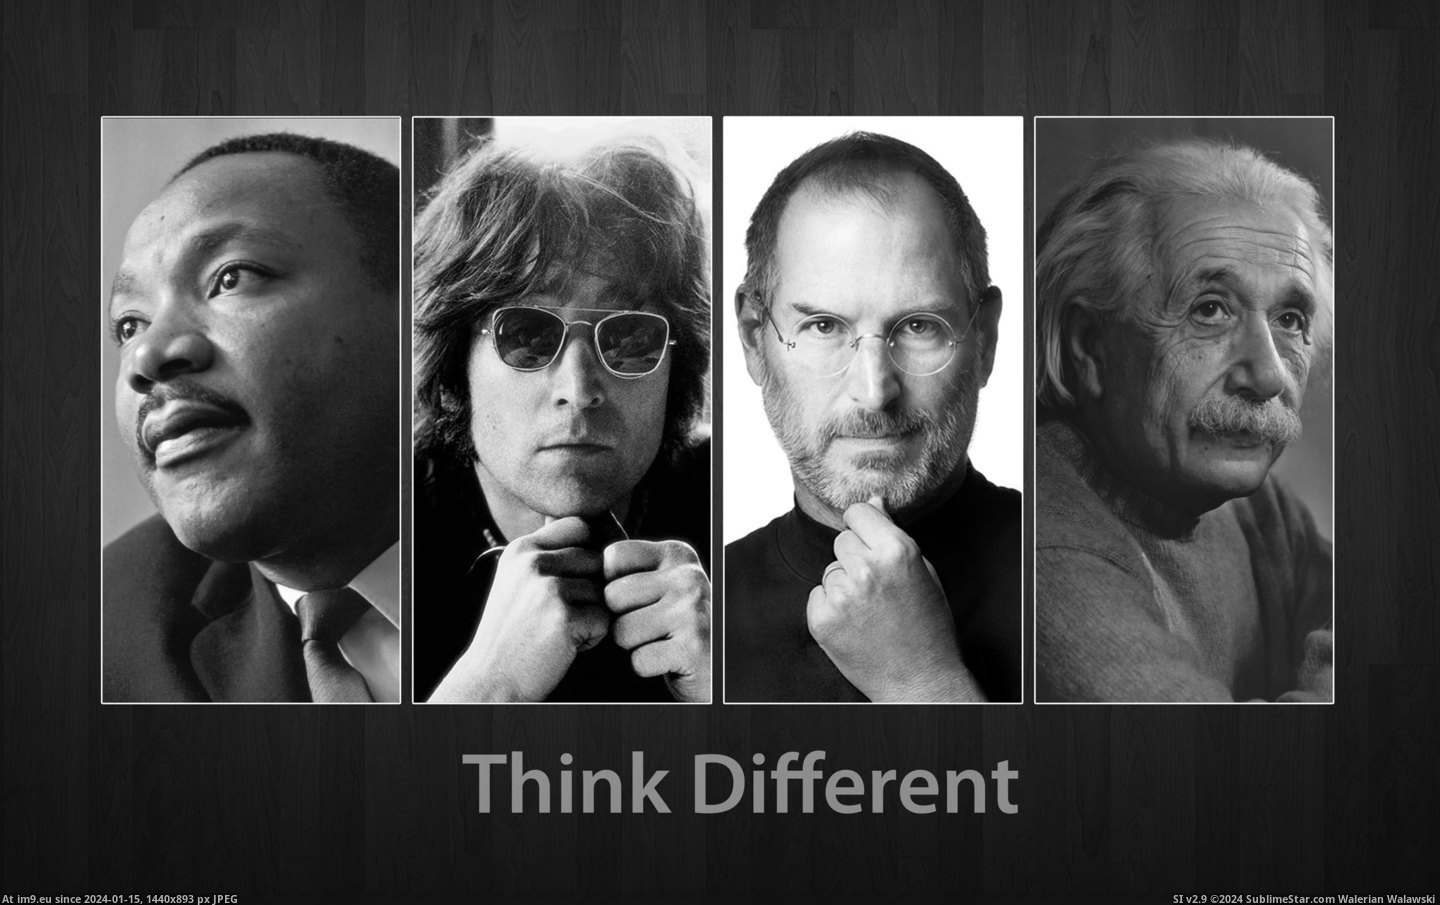 #Wallpaper  #Wide Think Different Wide HD Wallpaper Pic. (Изображение из альбом Unique HD Wallpapers))